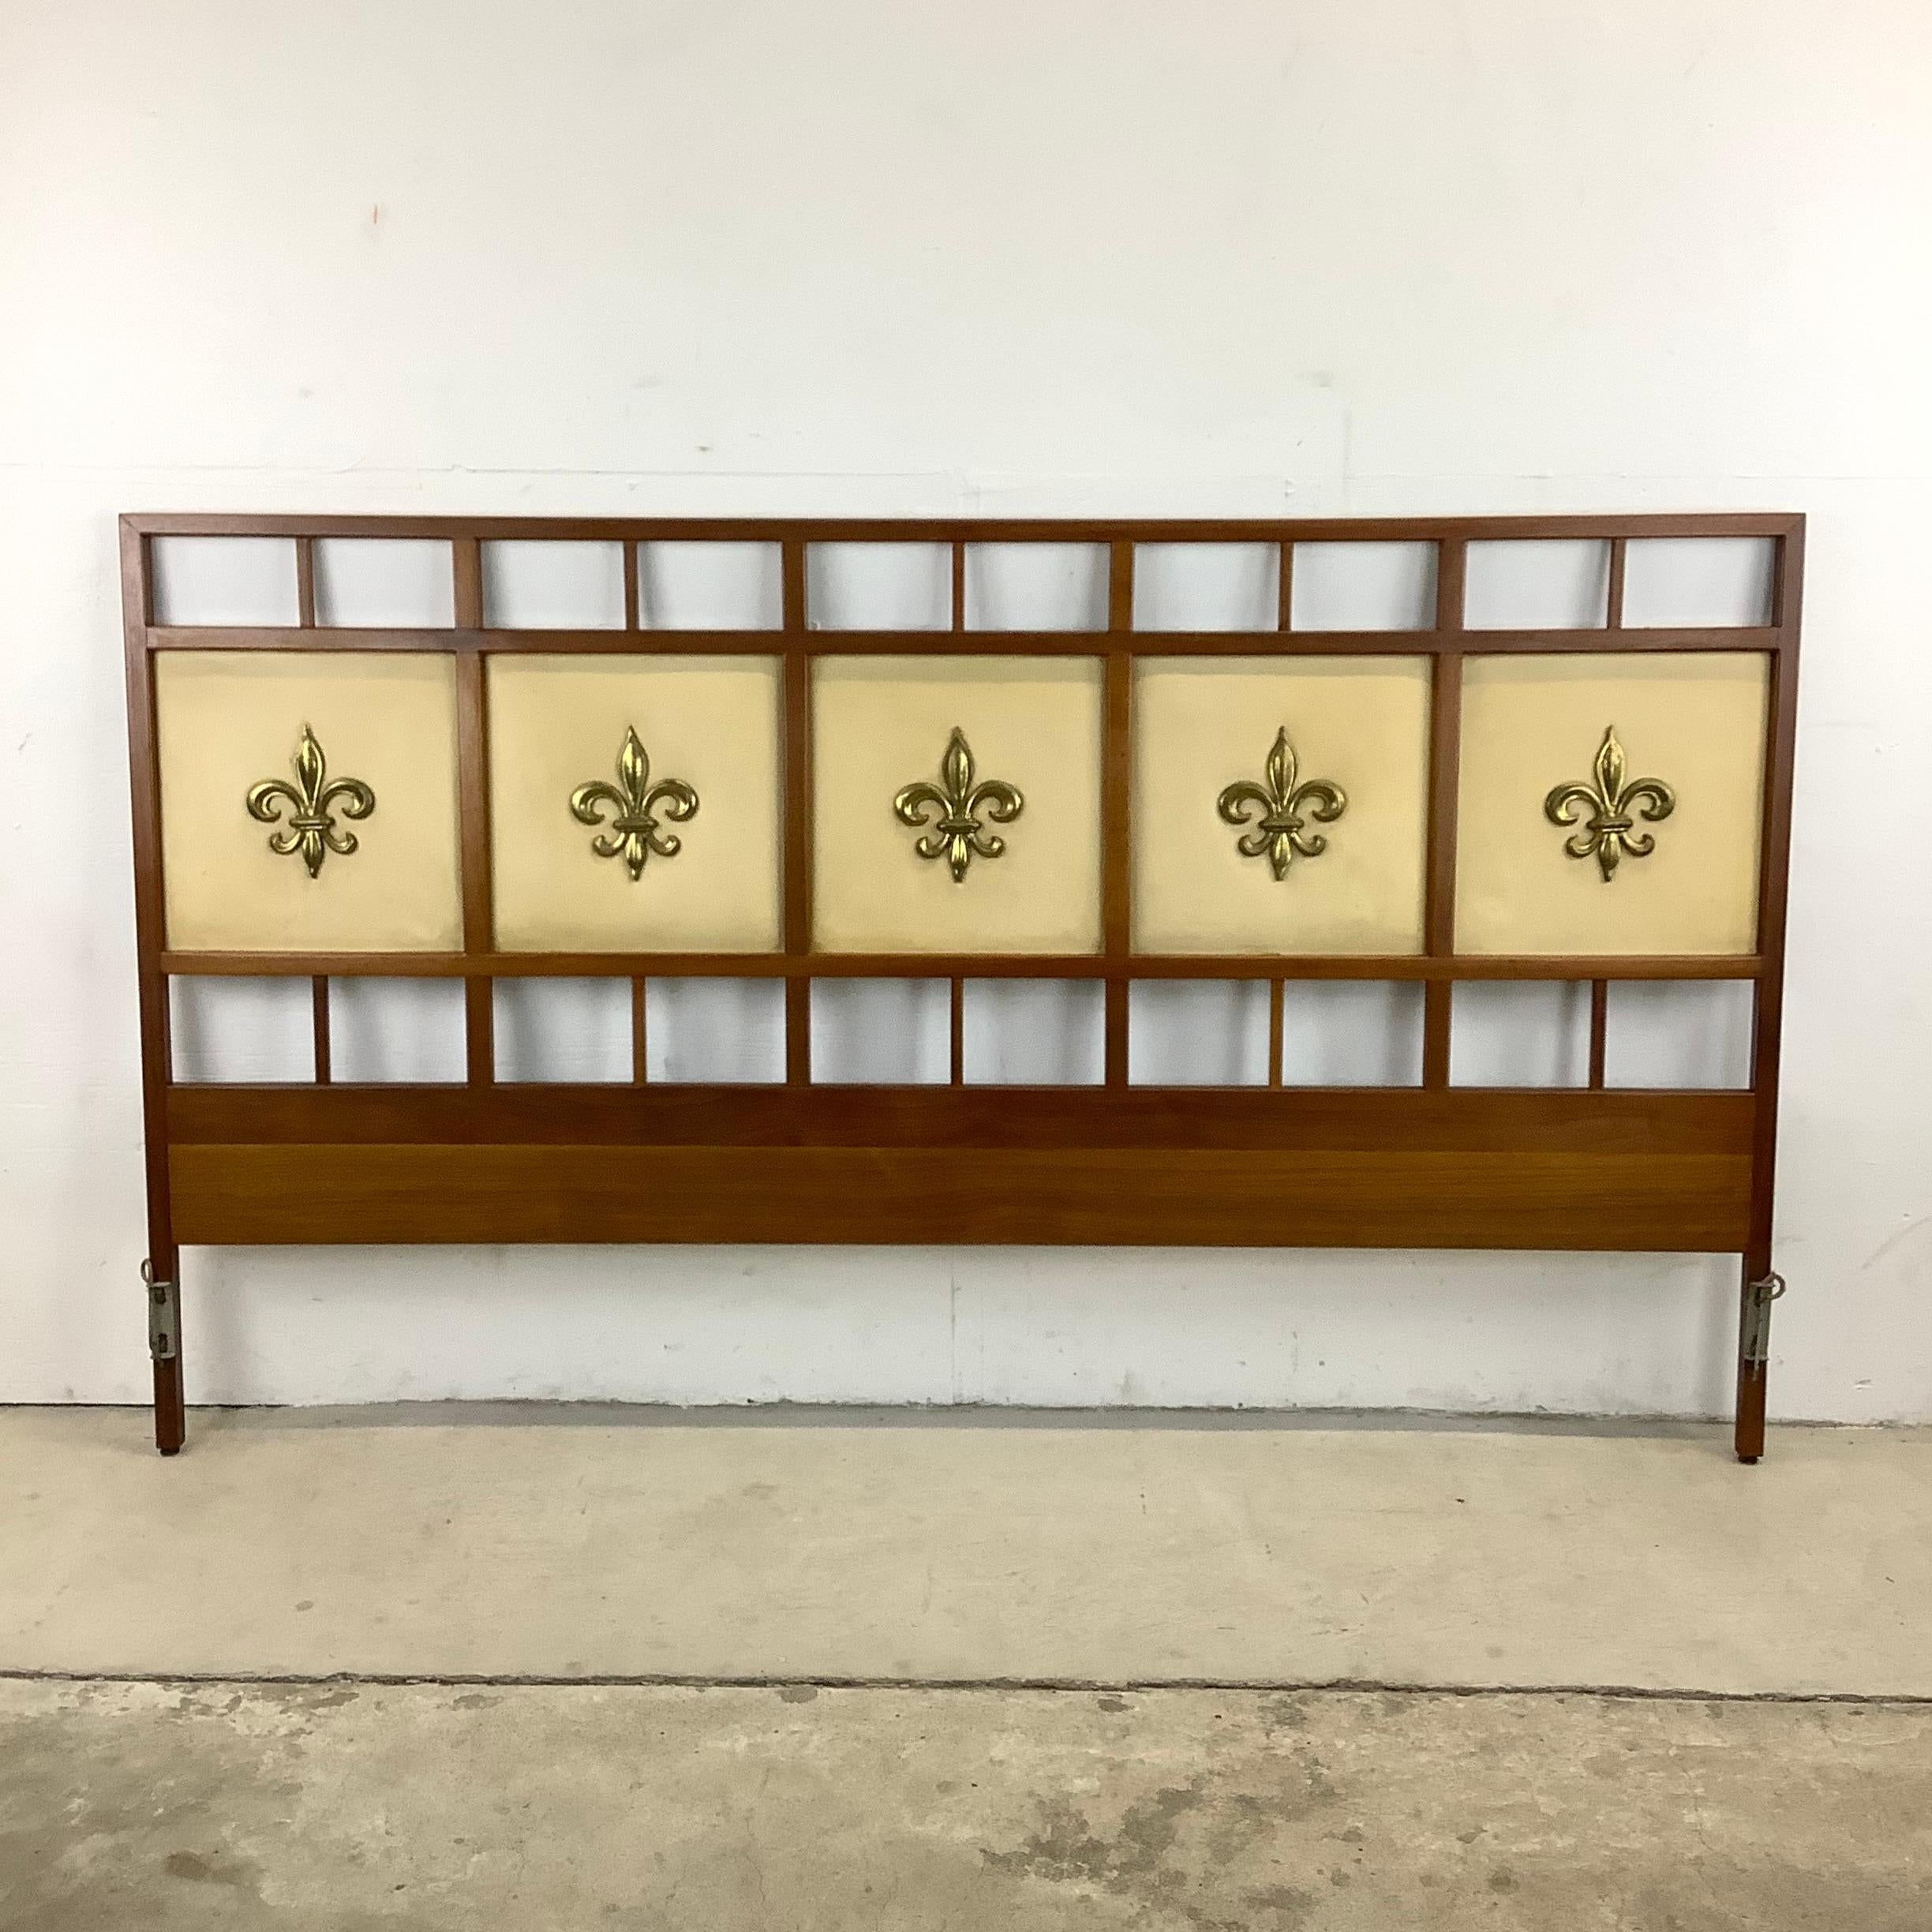 This eye-catching Mid-Century Modern headboard features a bold mixture of walnut wood finish and decorative fronts with brass fleur de lis details. The impressive Size of this king Size headboard by Gerry Zanck for Gregori makes a striking